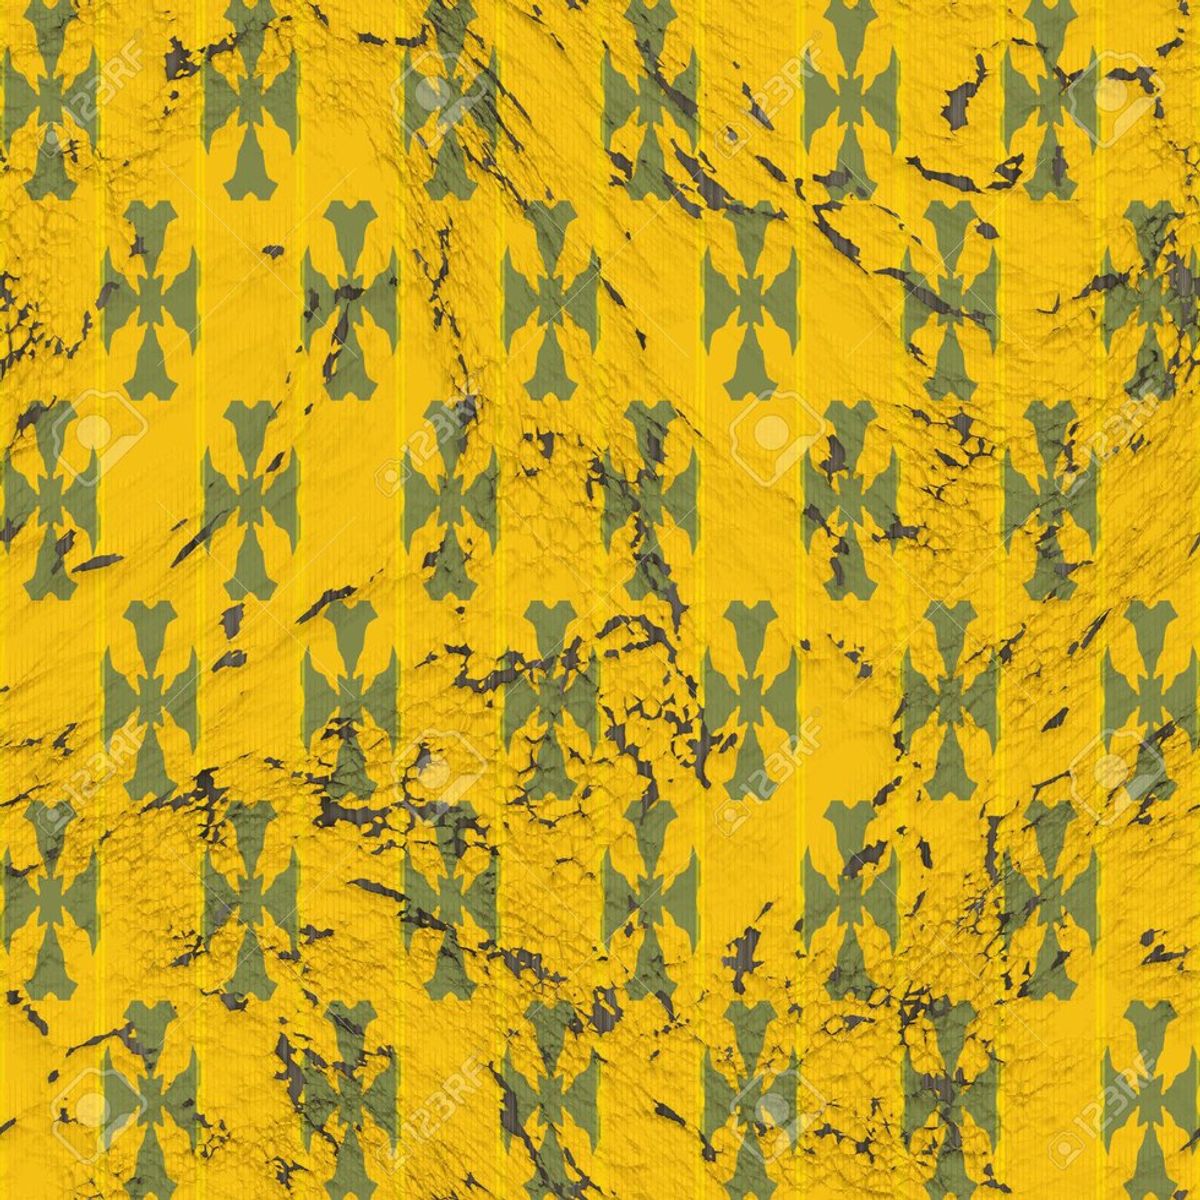 The Yellow Wallpaper Inspired Poem